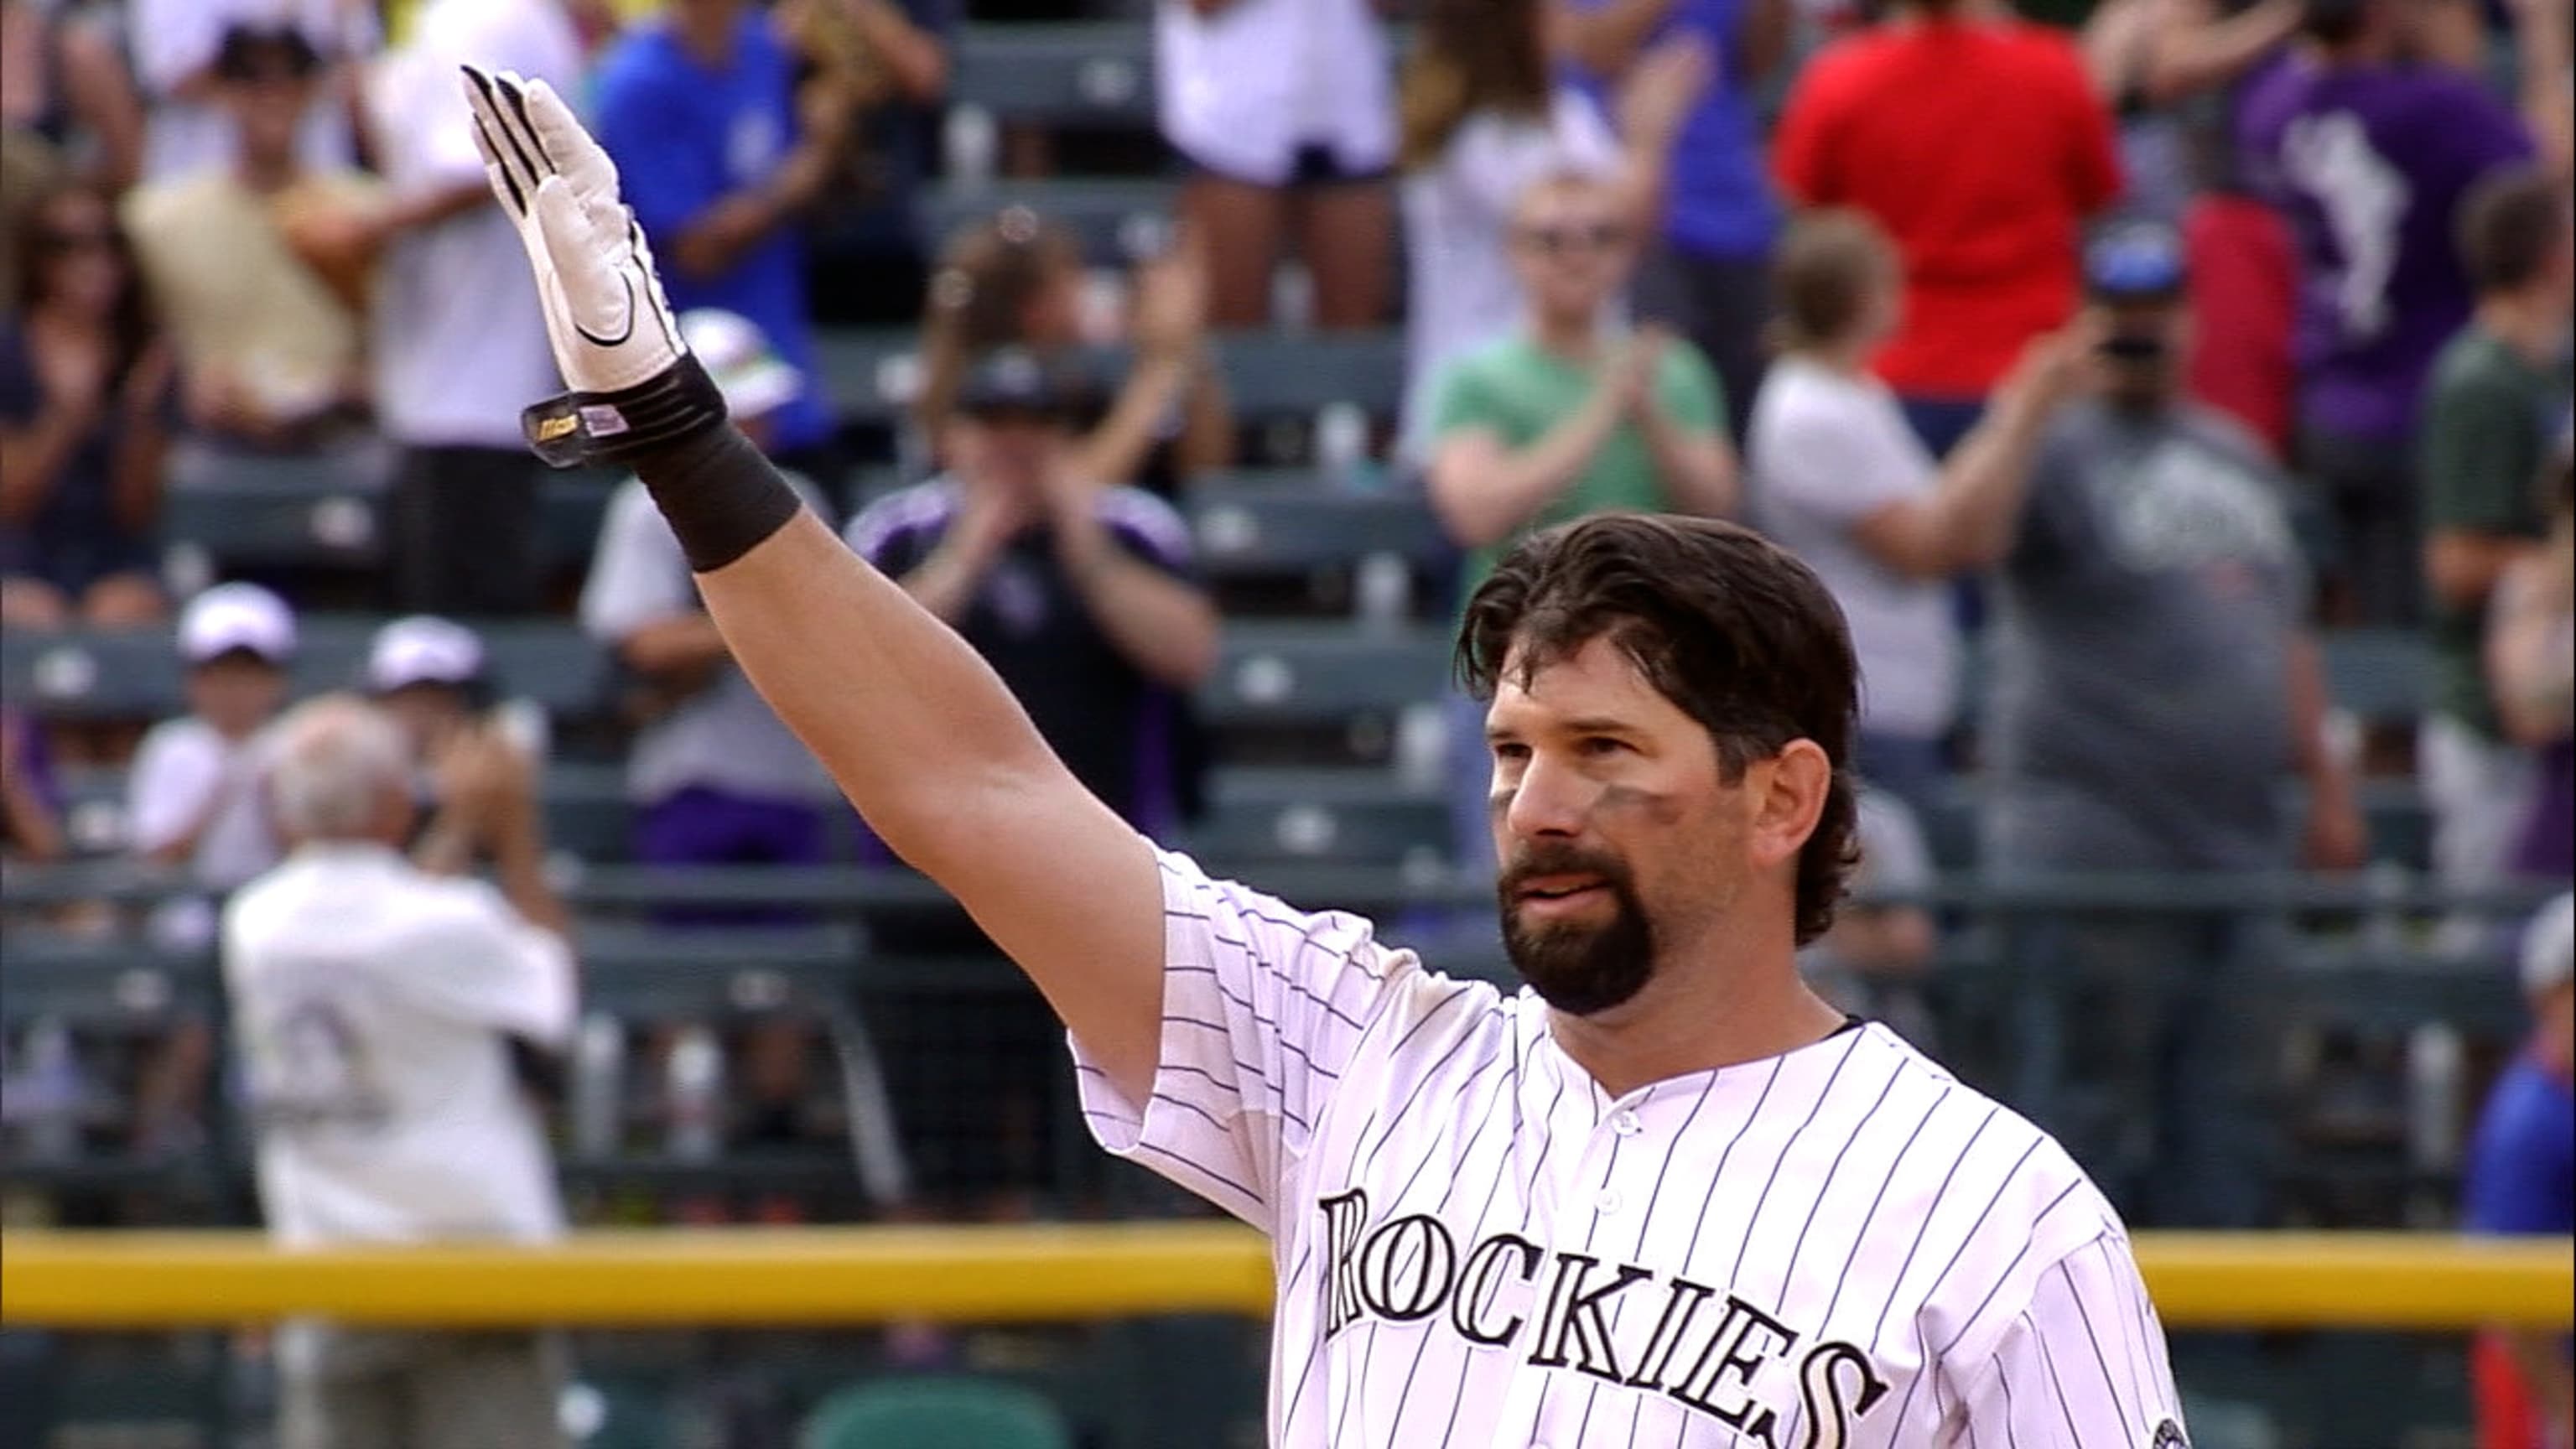 Todd Helton 2022 Hall of Fame results